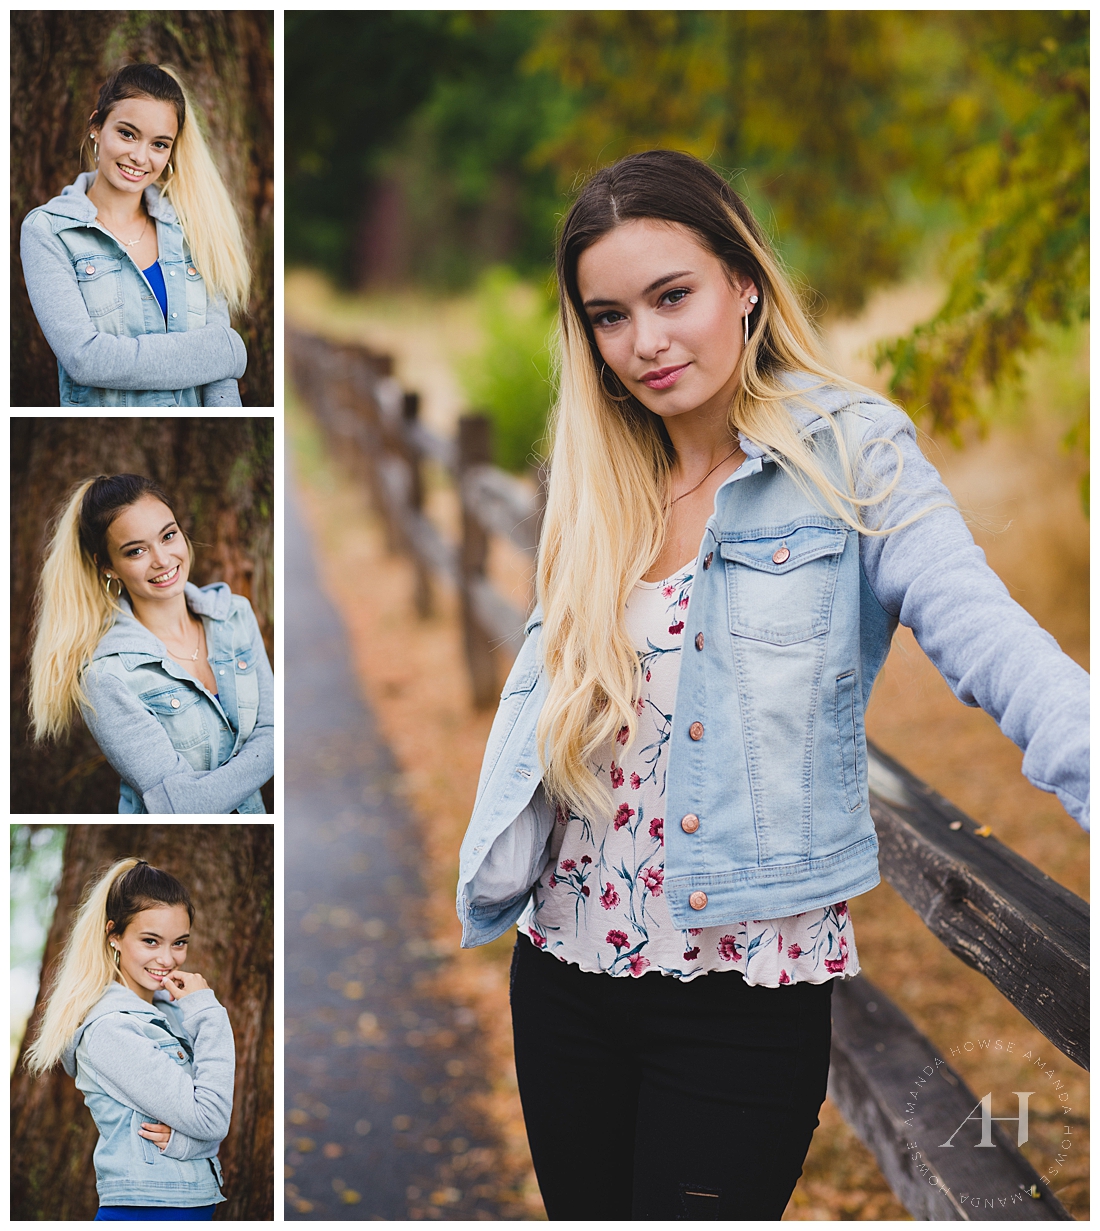 How to Layer Outfits for Senior Portraits | Rustic Outdoor Portraits with Outfit Inspo, Pose Ideas for Senior Girls | Photographed by the Best Tacoma Senior Photographer Amanda Howse